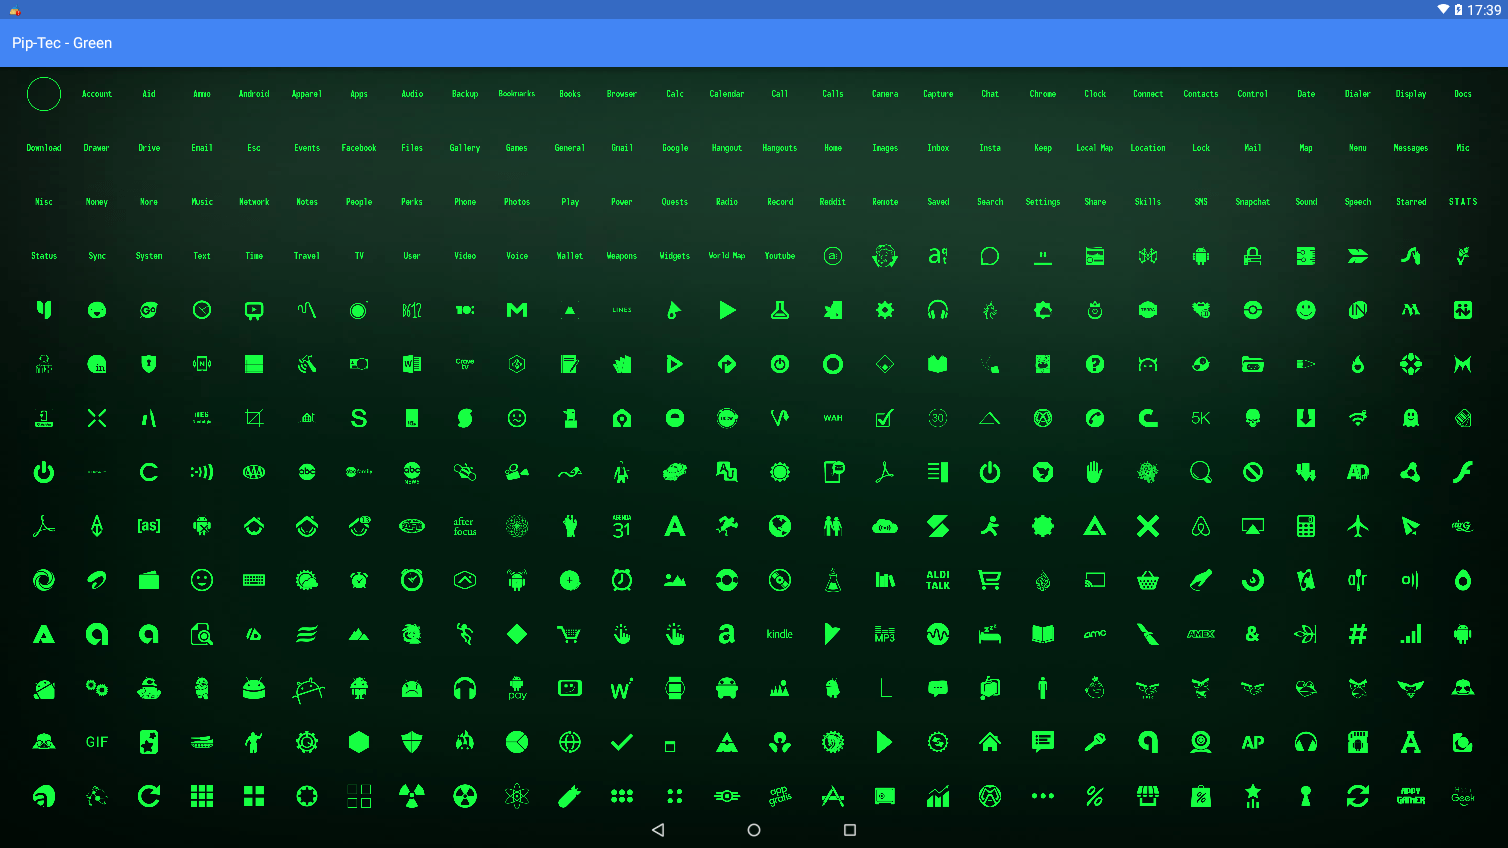 fallout pipboy icons